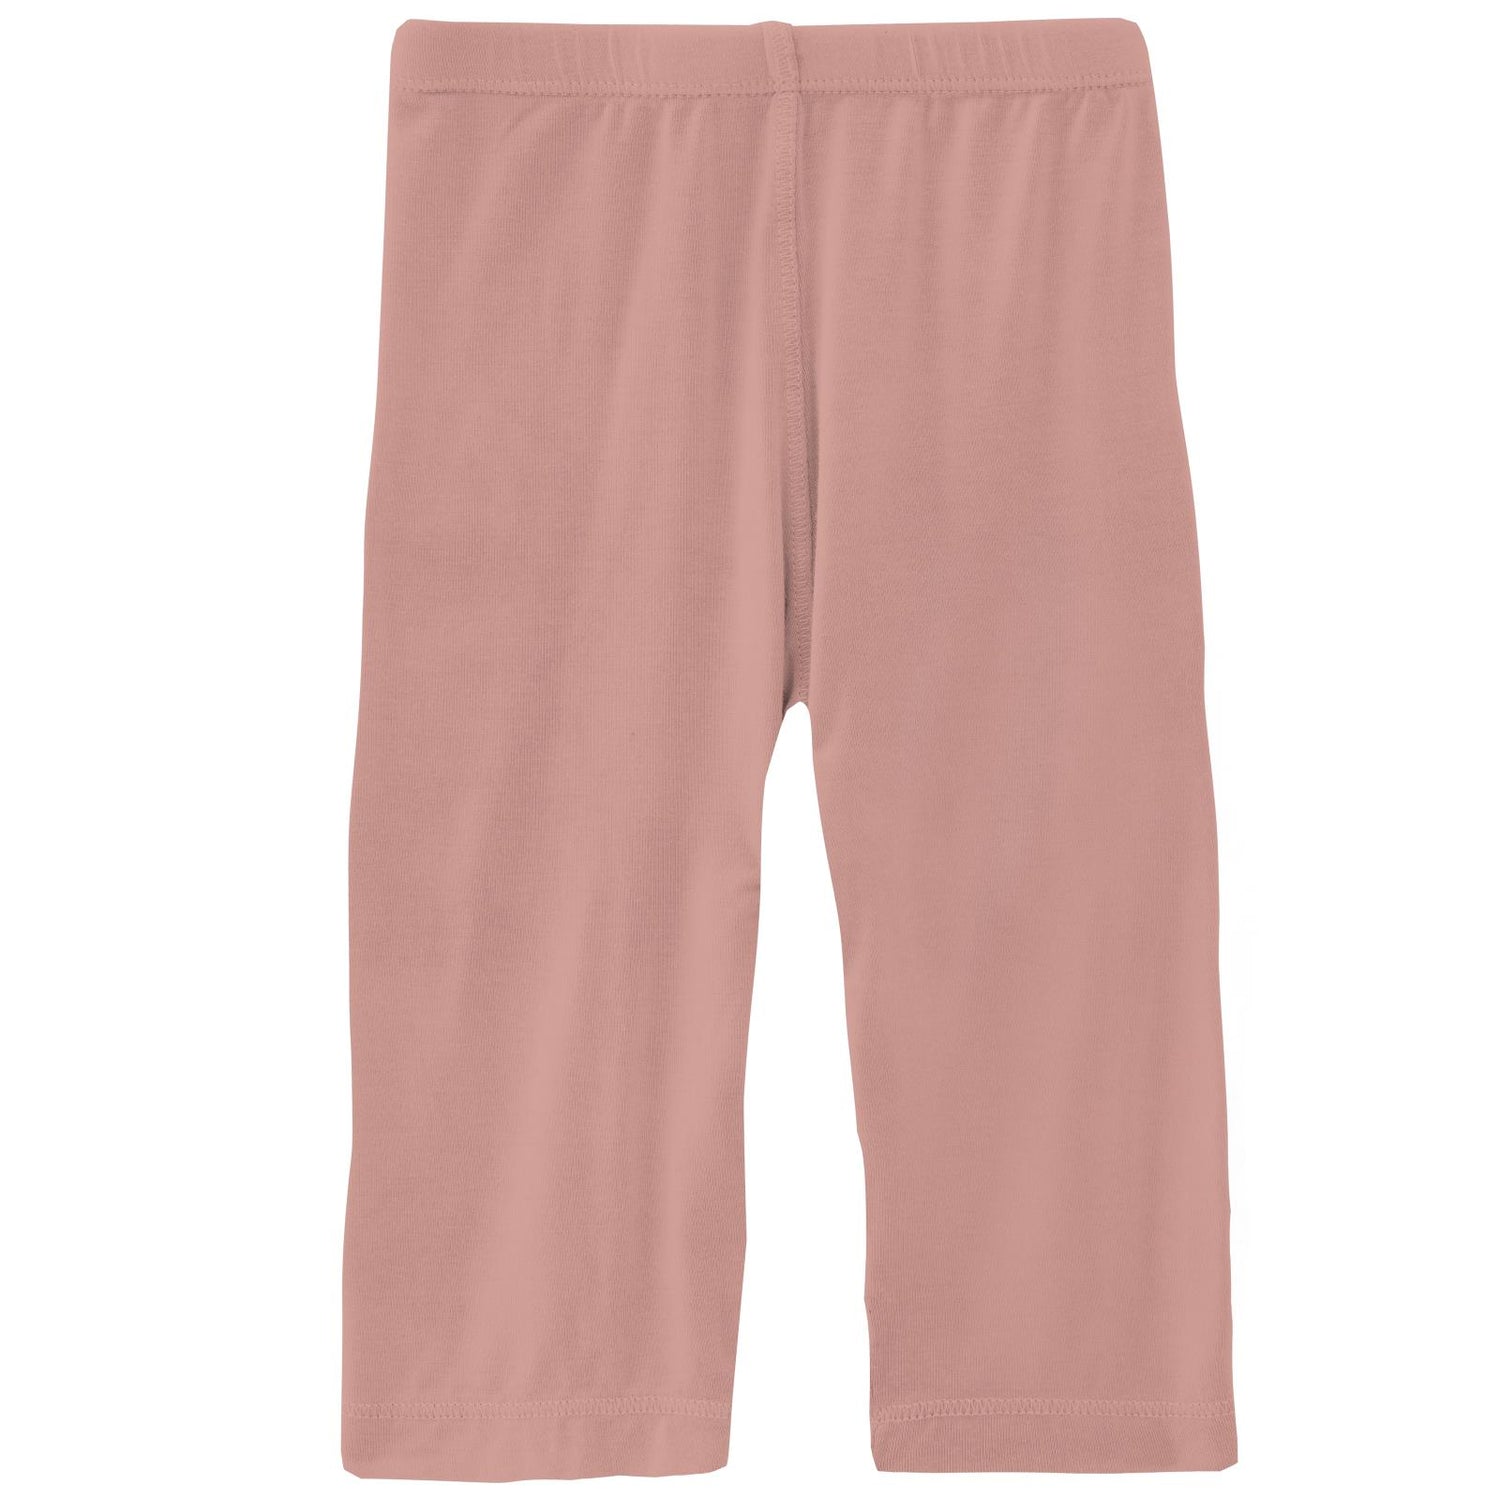 The Kickee Pants in Blush